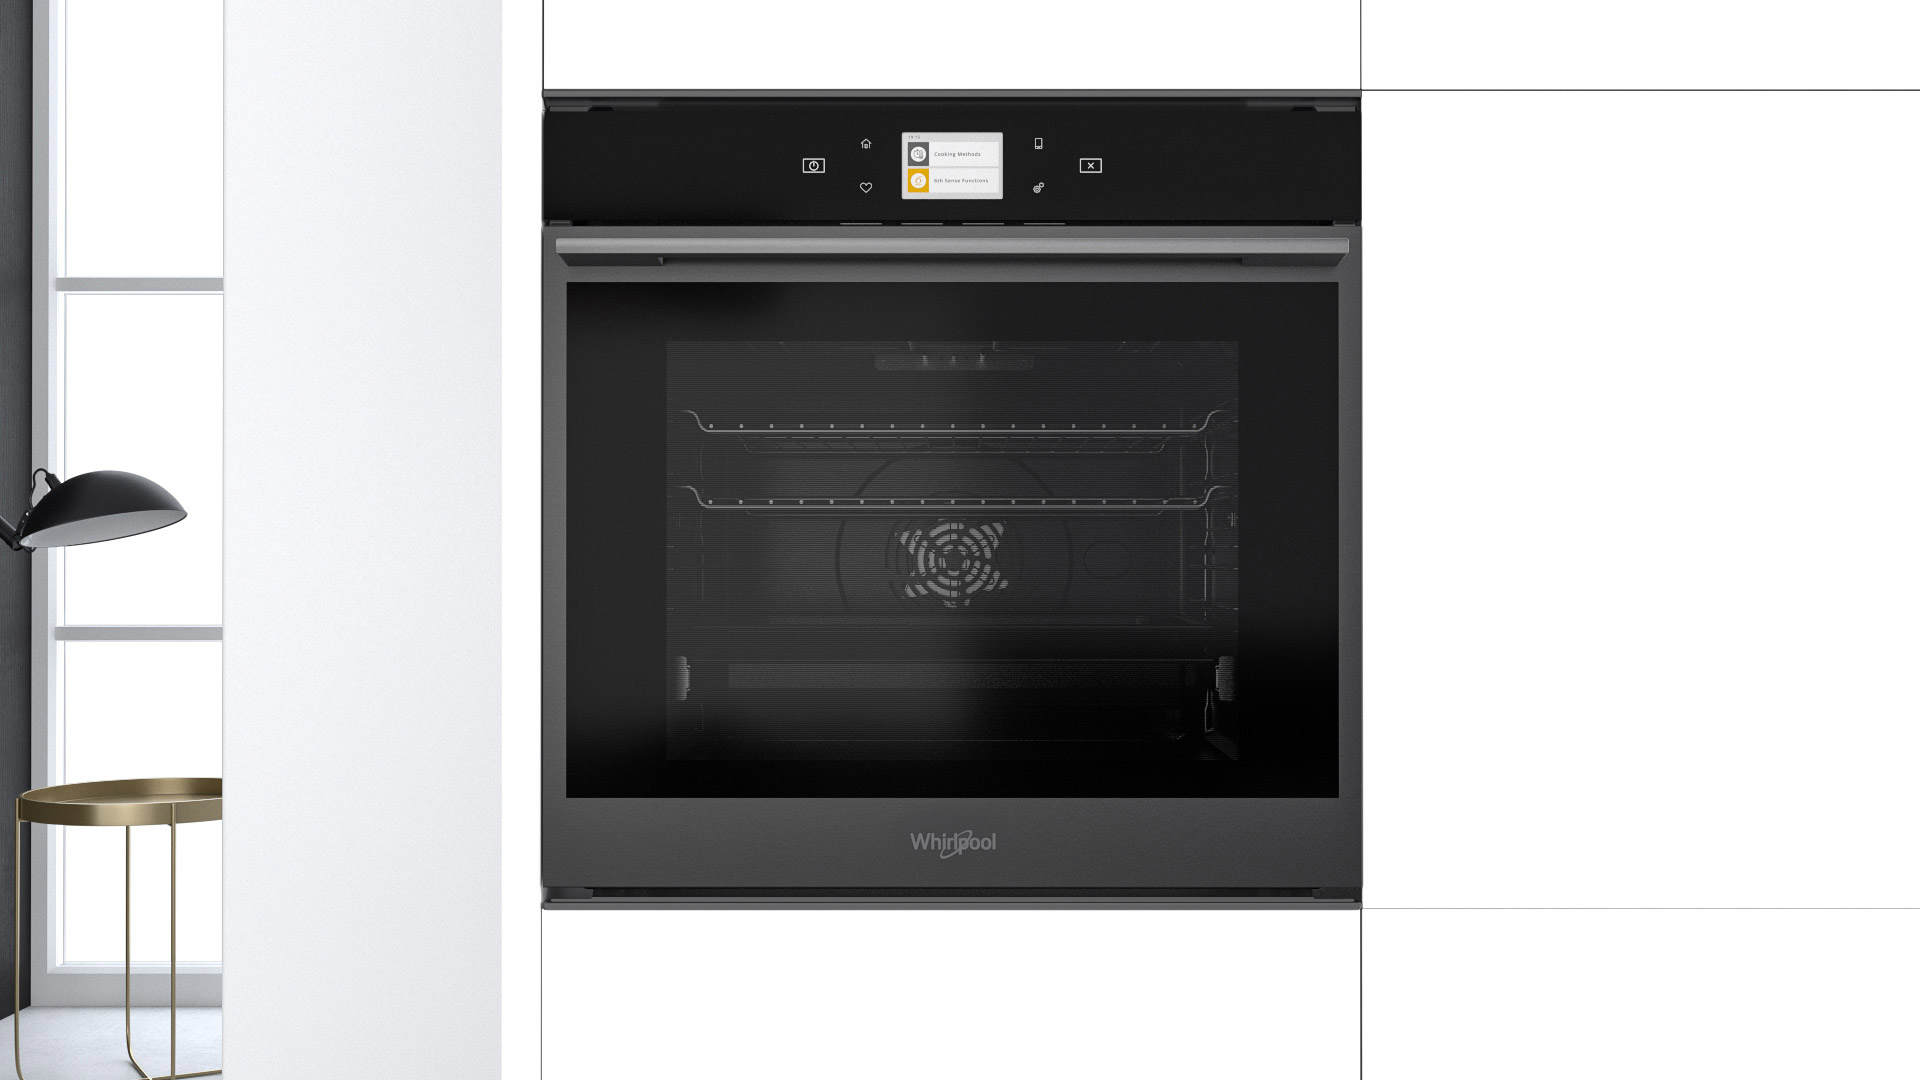 Glamour and performance blend together in the new W collection Black Fiber oven by Whirlpool